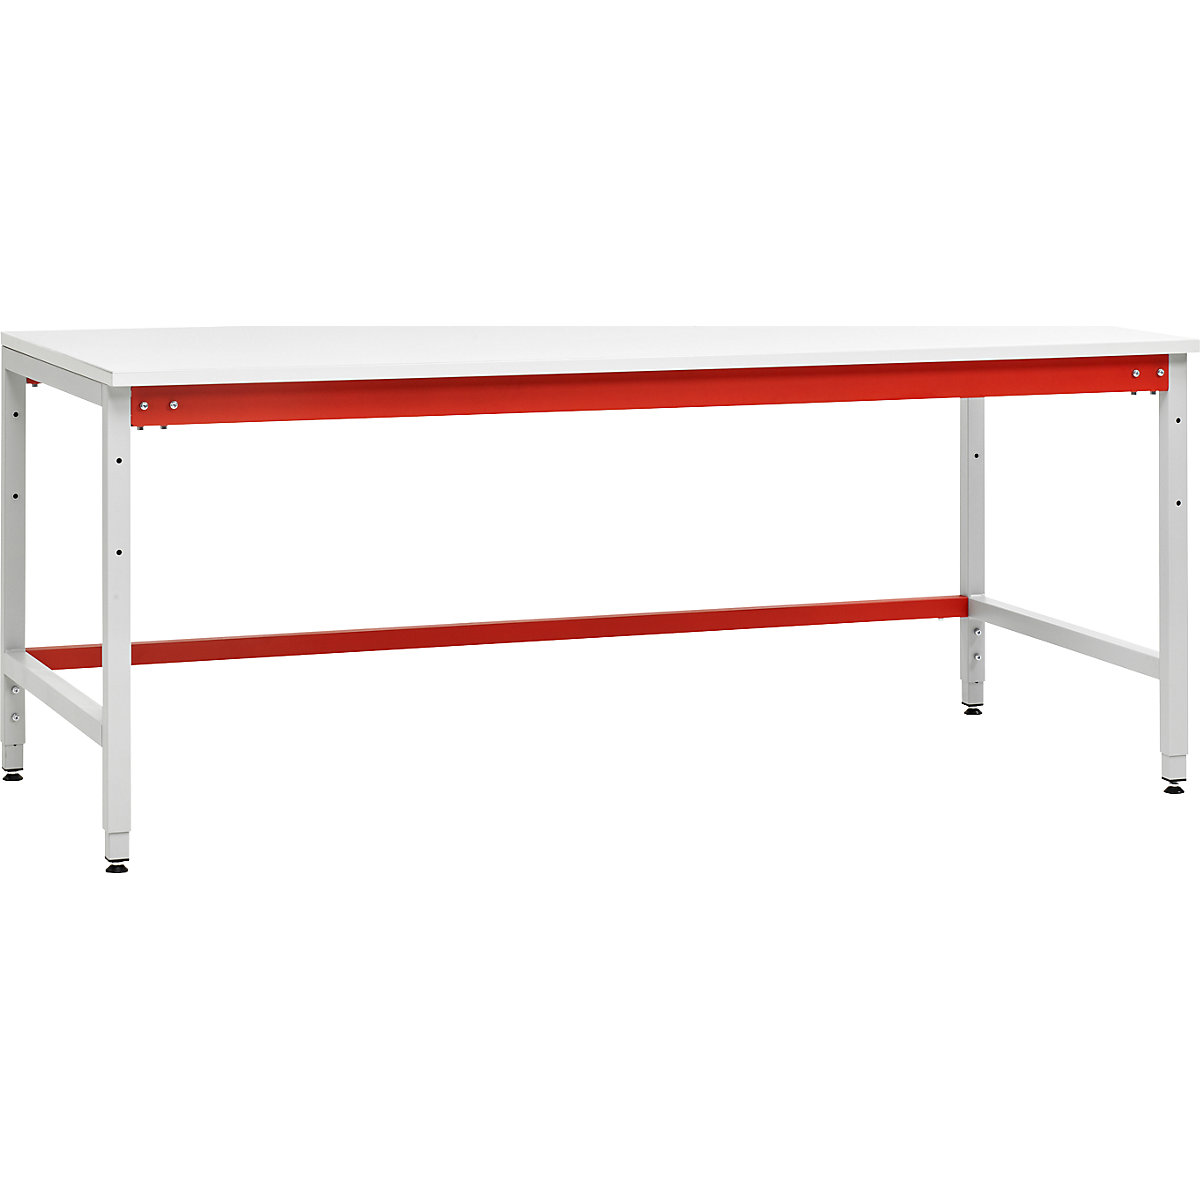 Packing table, standard, HxWxD 780 x 1800 x 900 mm-7